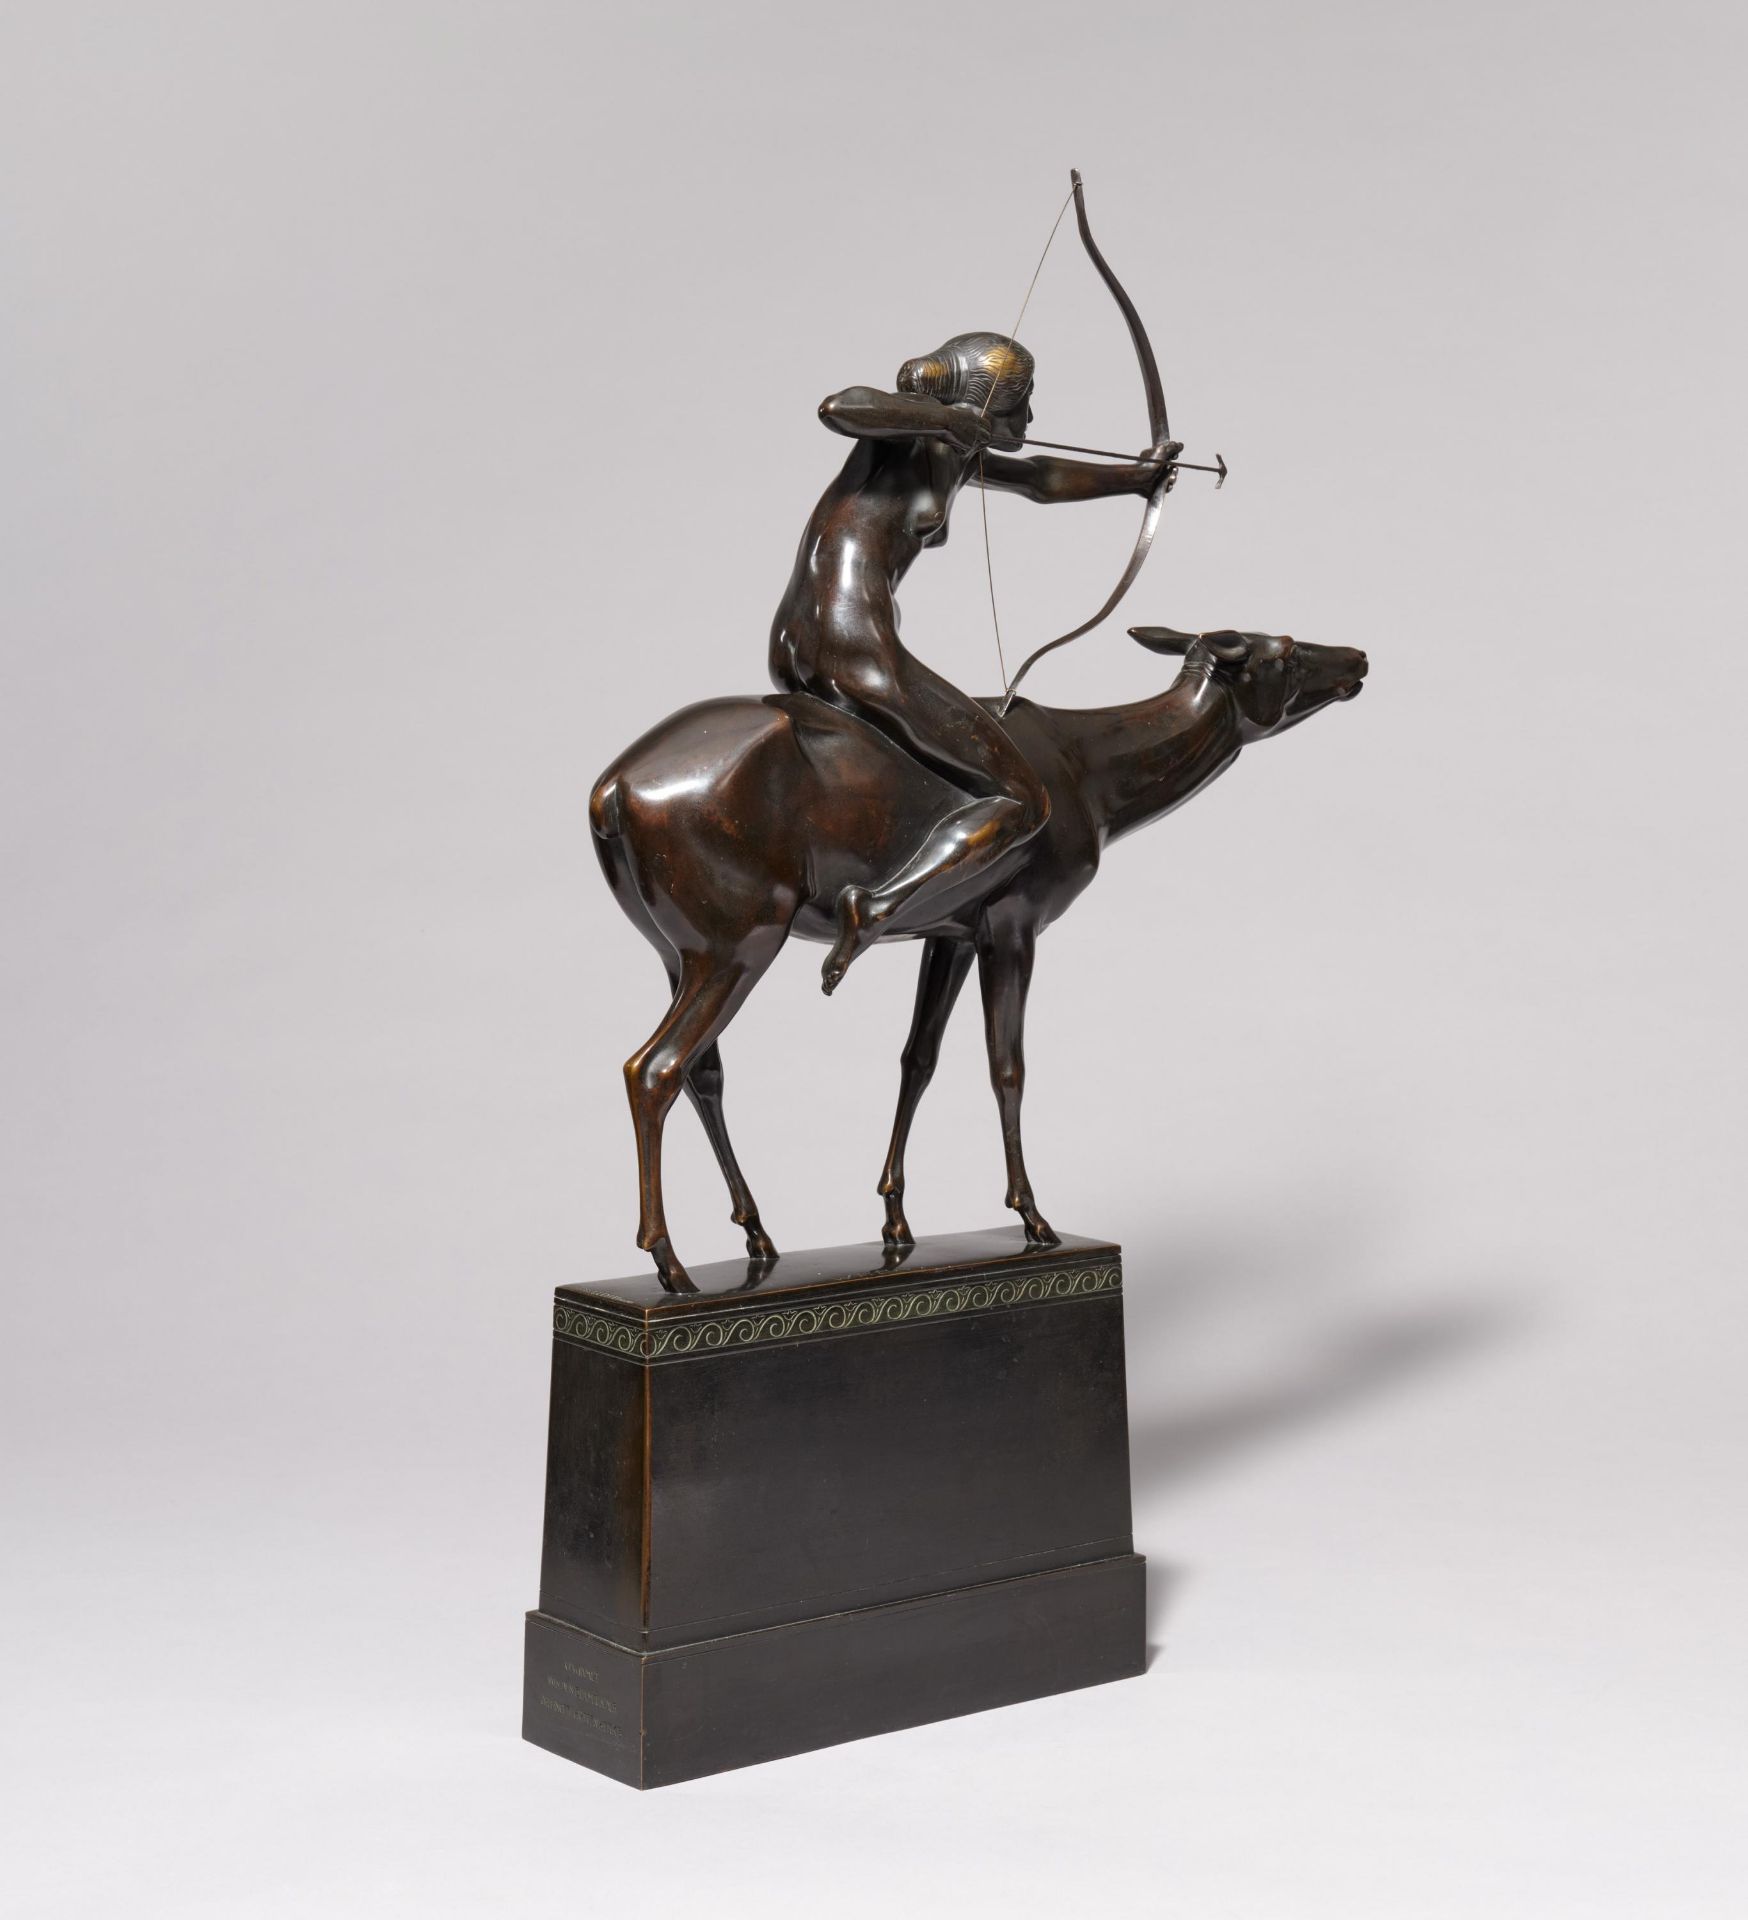 Georg Wrba: Diana on the Stag Cow - Image 3 of 4